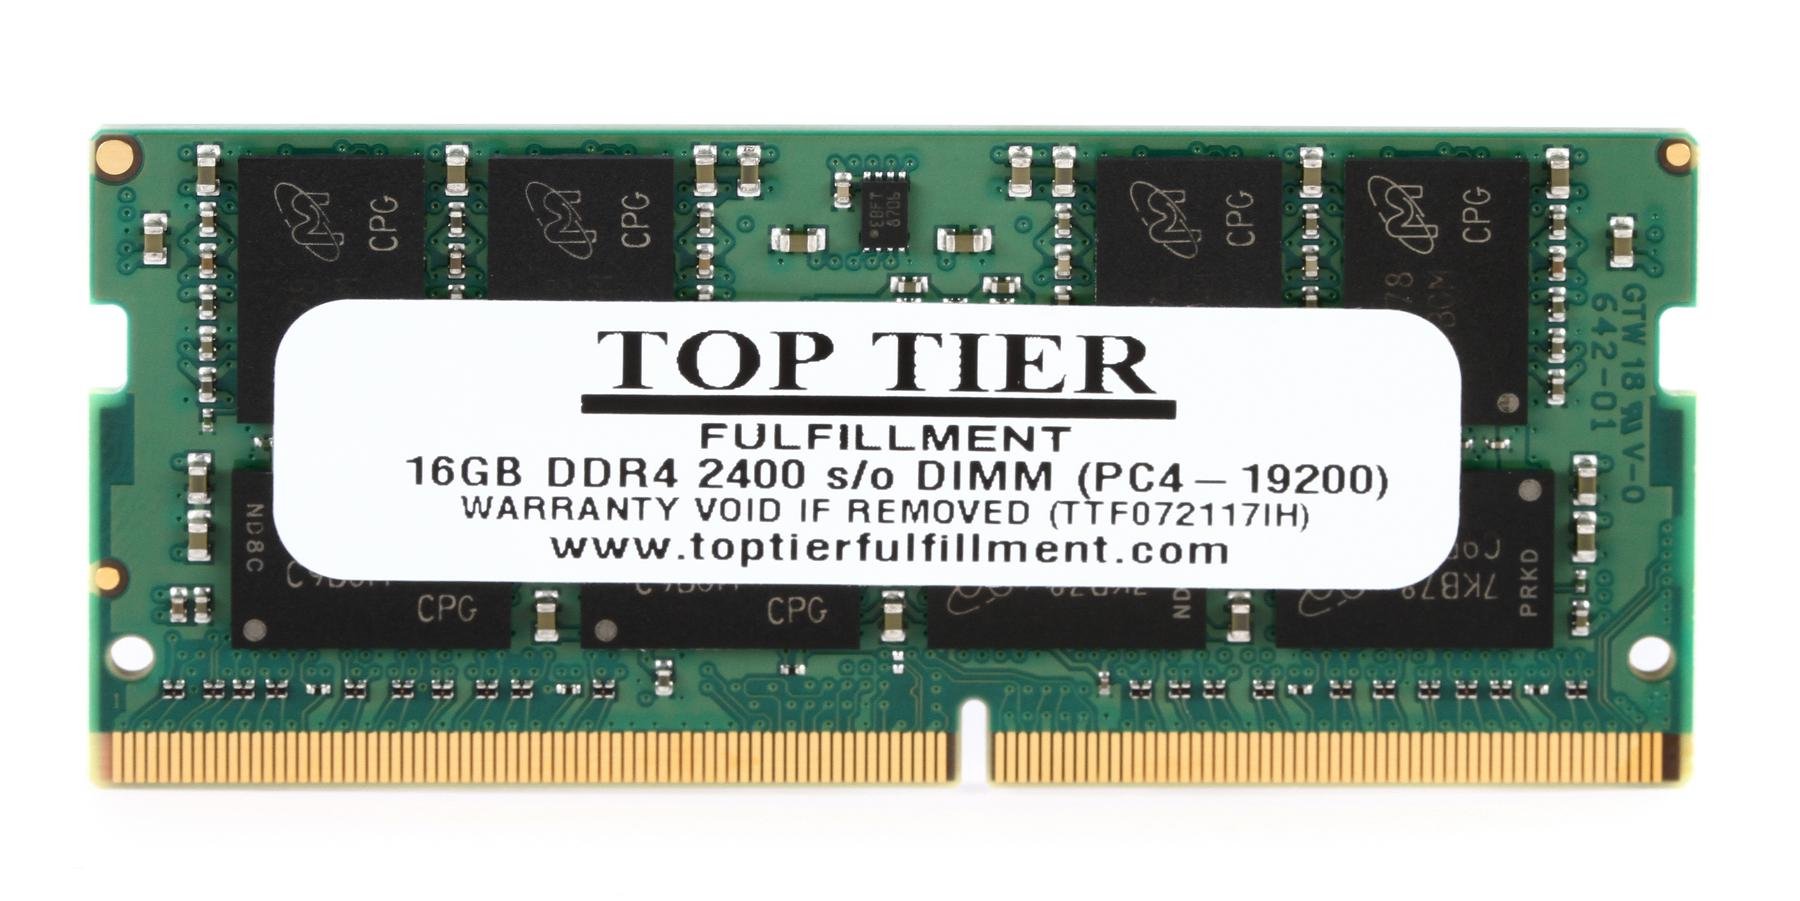 Top Tier Pc4 190 So Dimm 16gb Ddr4 2400mhz Sweetwater